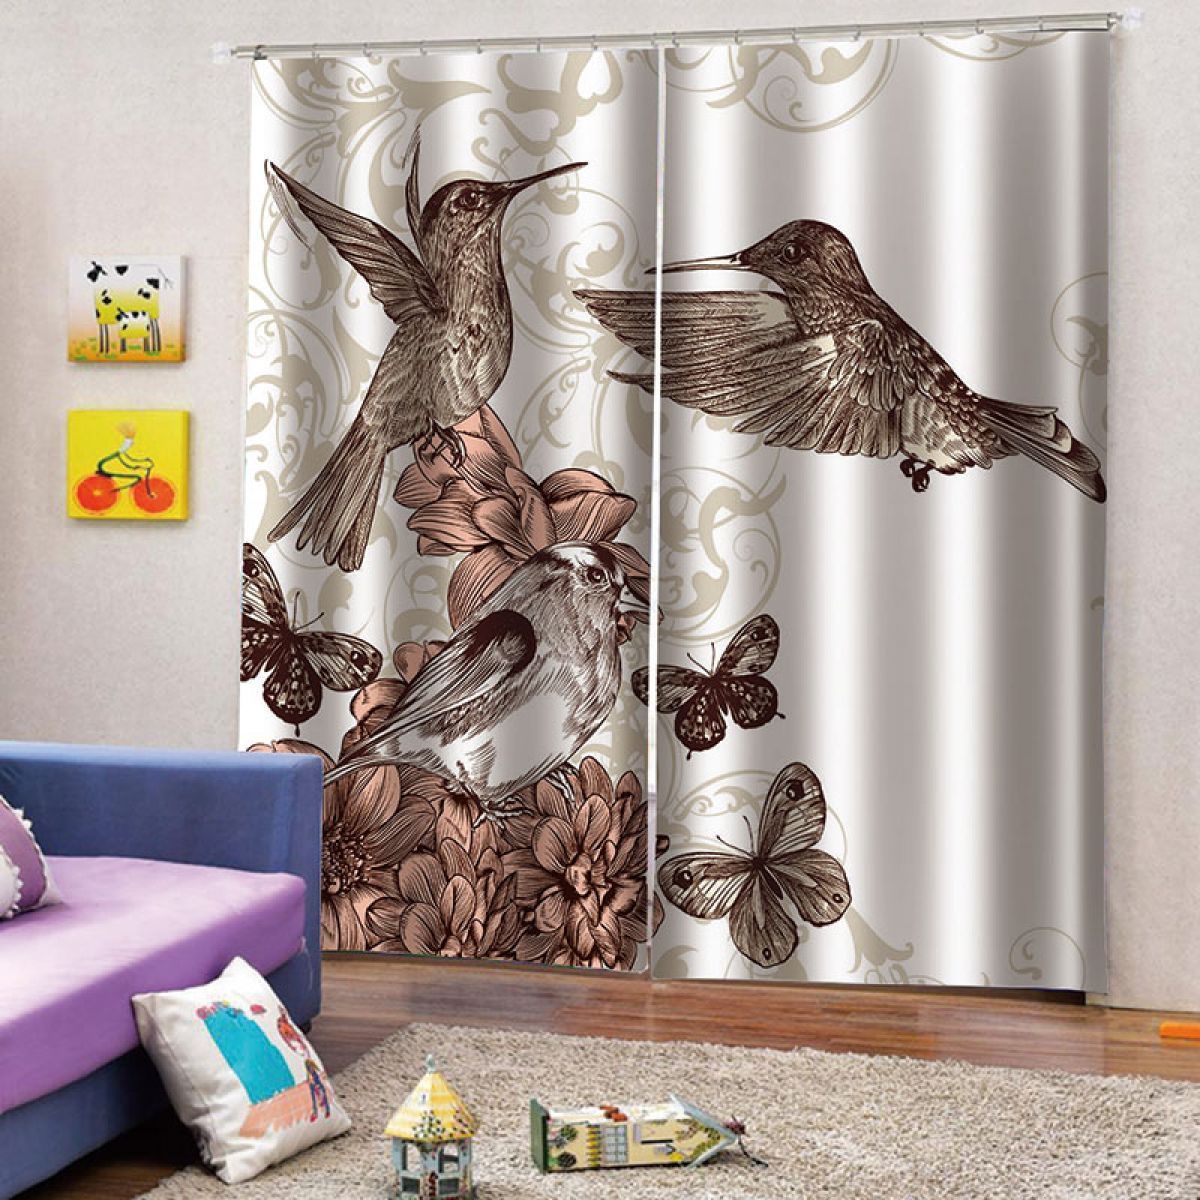 Birds And Flower Printed Window Curtain Home Decor